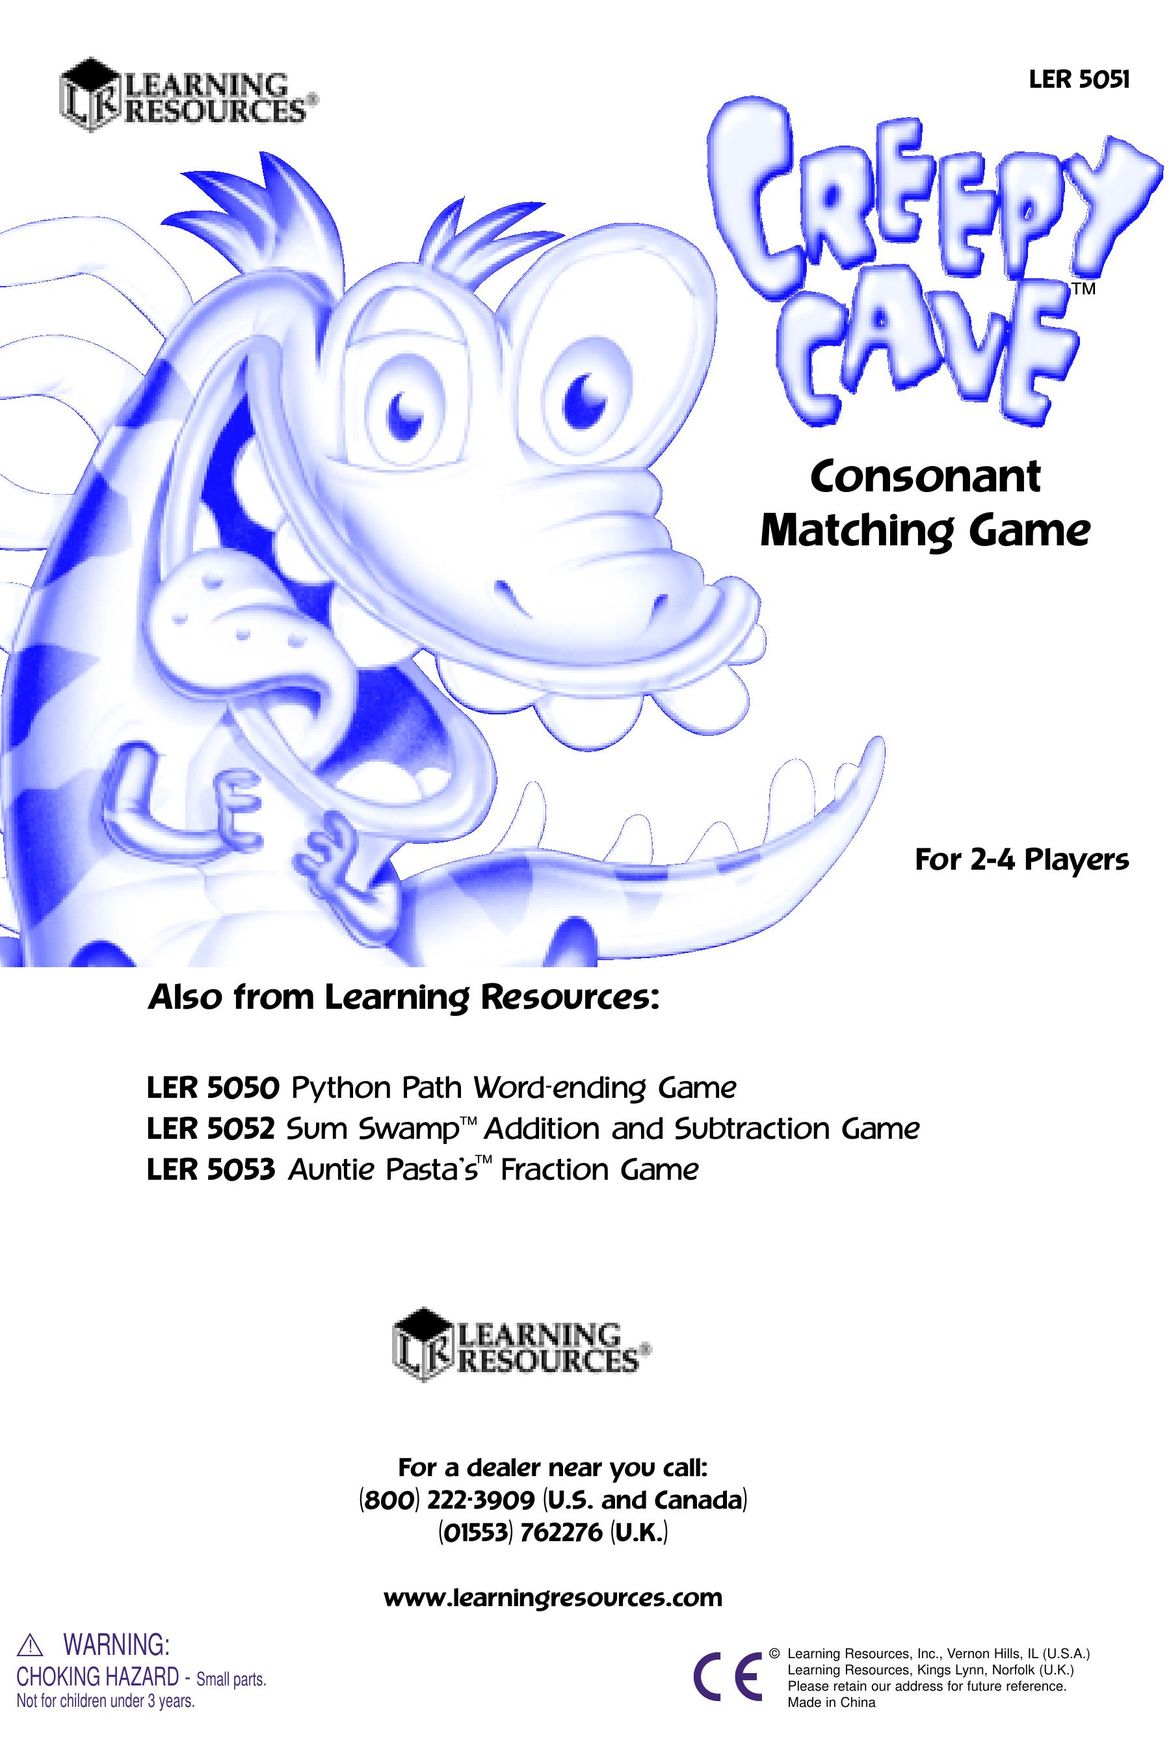 Learning Resources LER 5051 Games User Manual